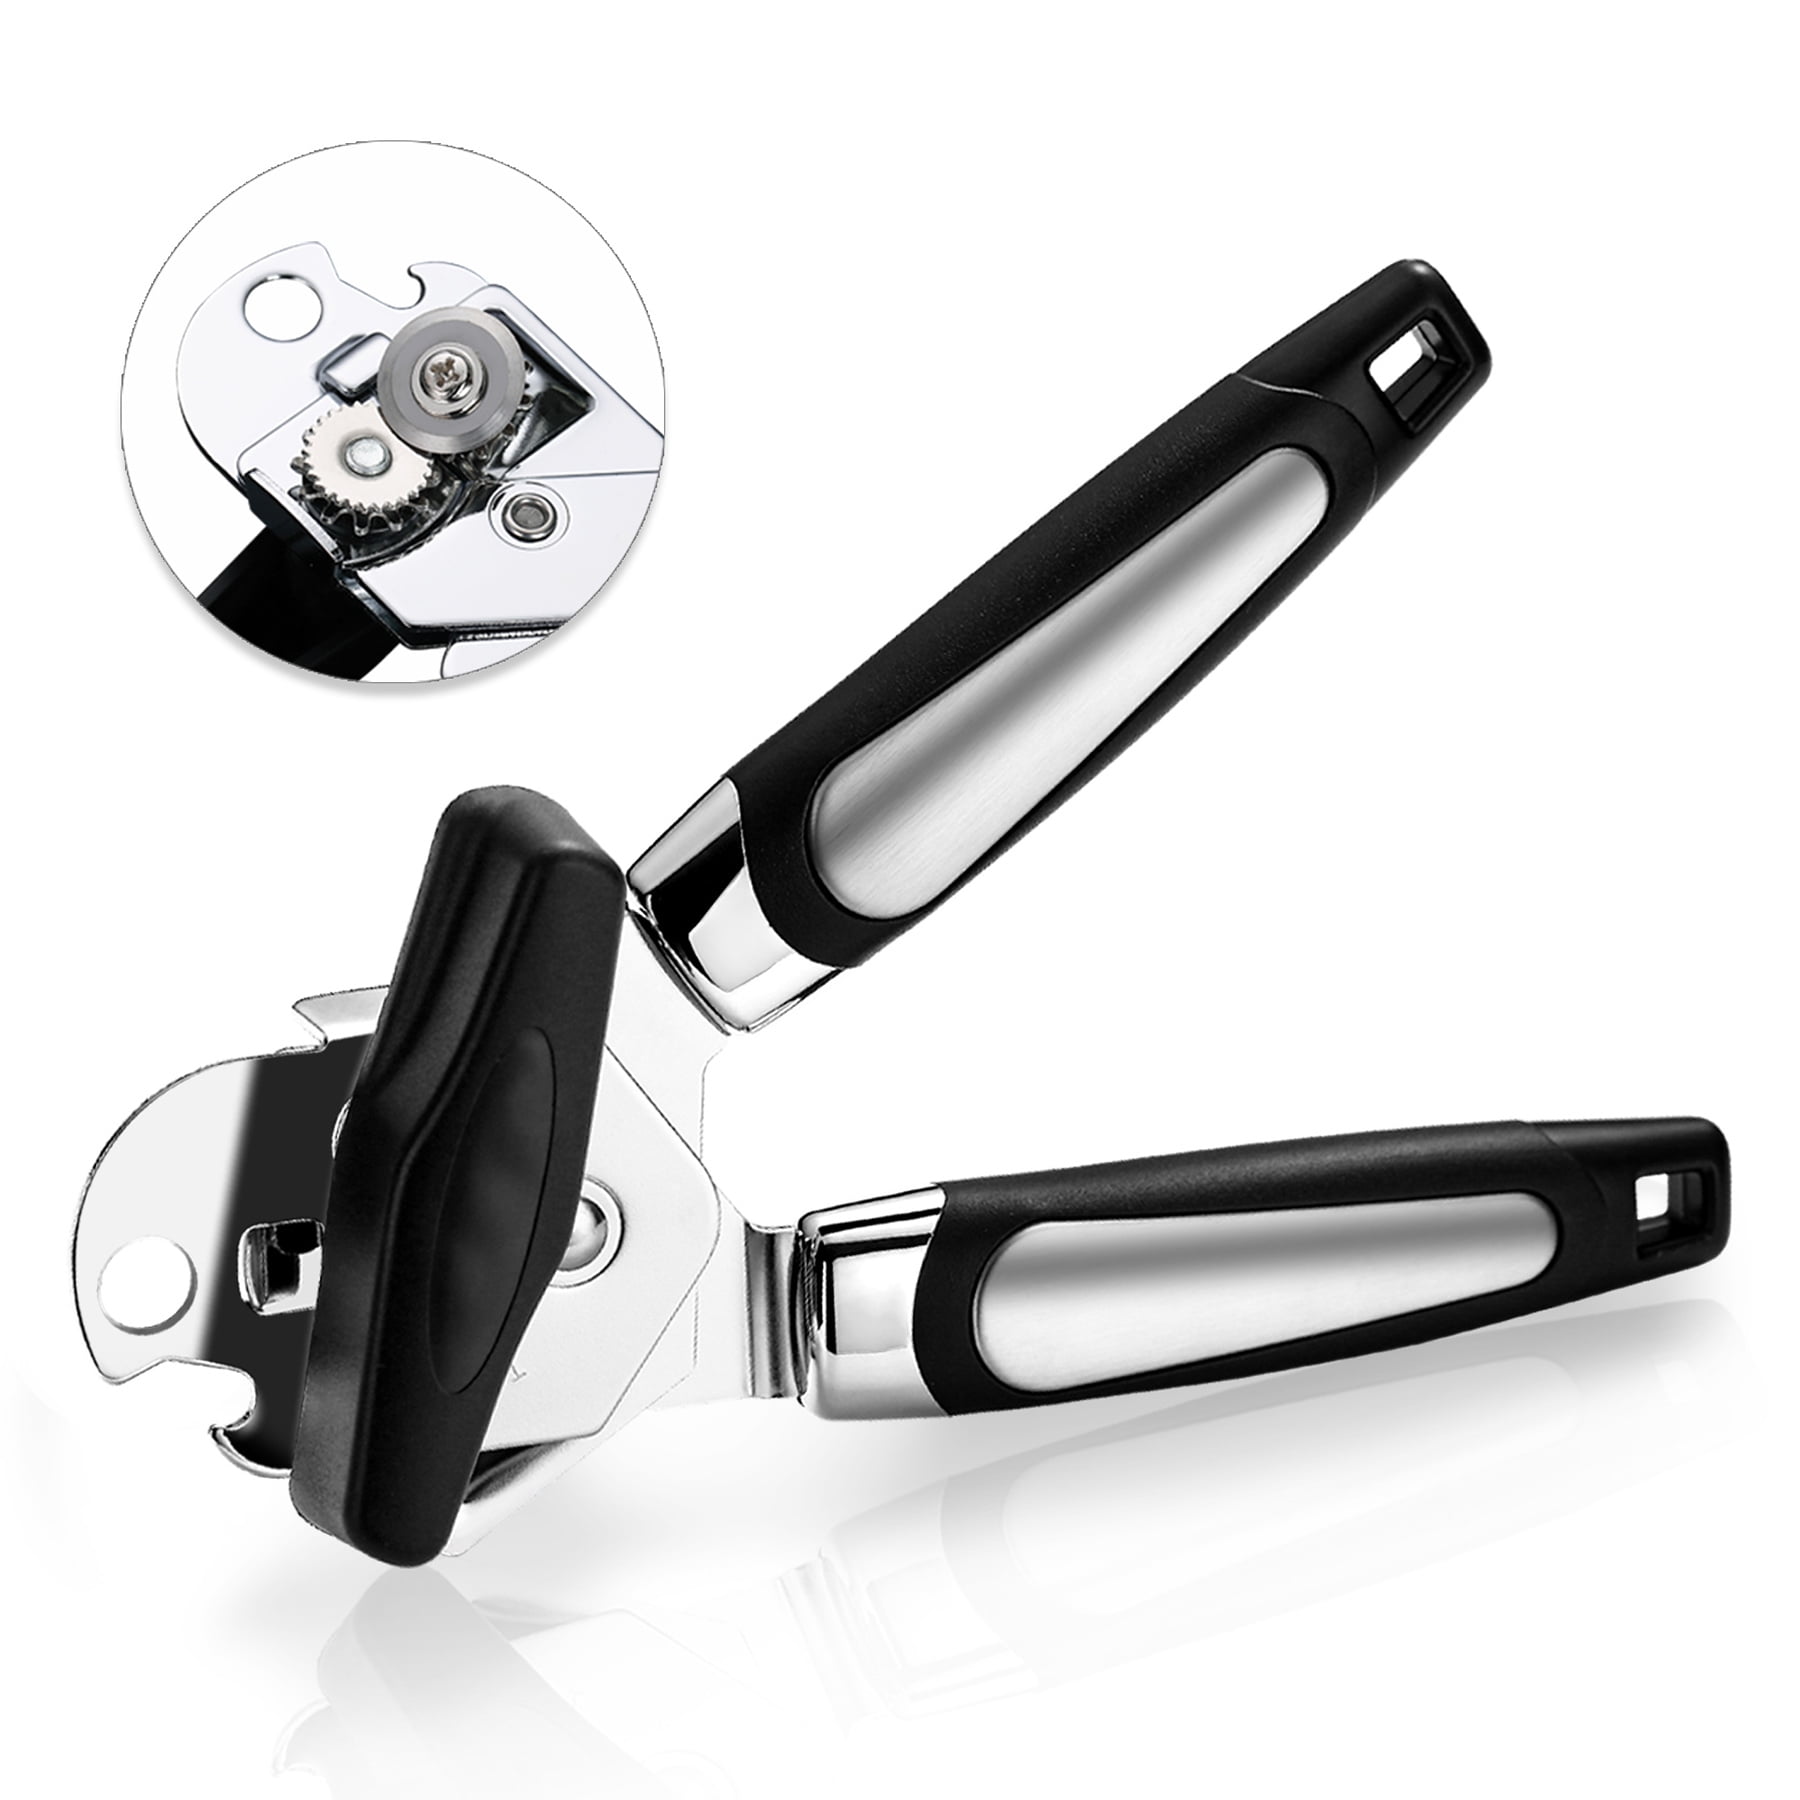 Wine Bottle Opener Black Safe Cut Can Opener Manual Best Quality Professional Smooth Edge Dishwasher Ergonomic Non-Slip Stainless Steel Portable Easy Open Kitchen Can Opener Best Seller 